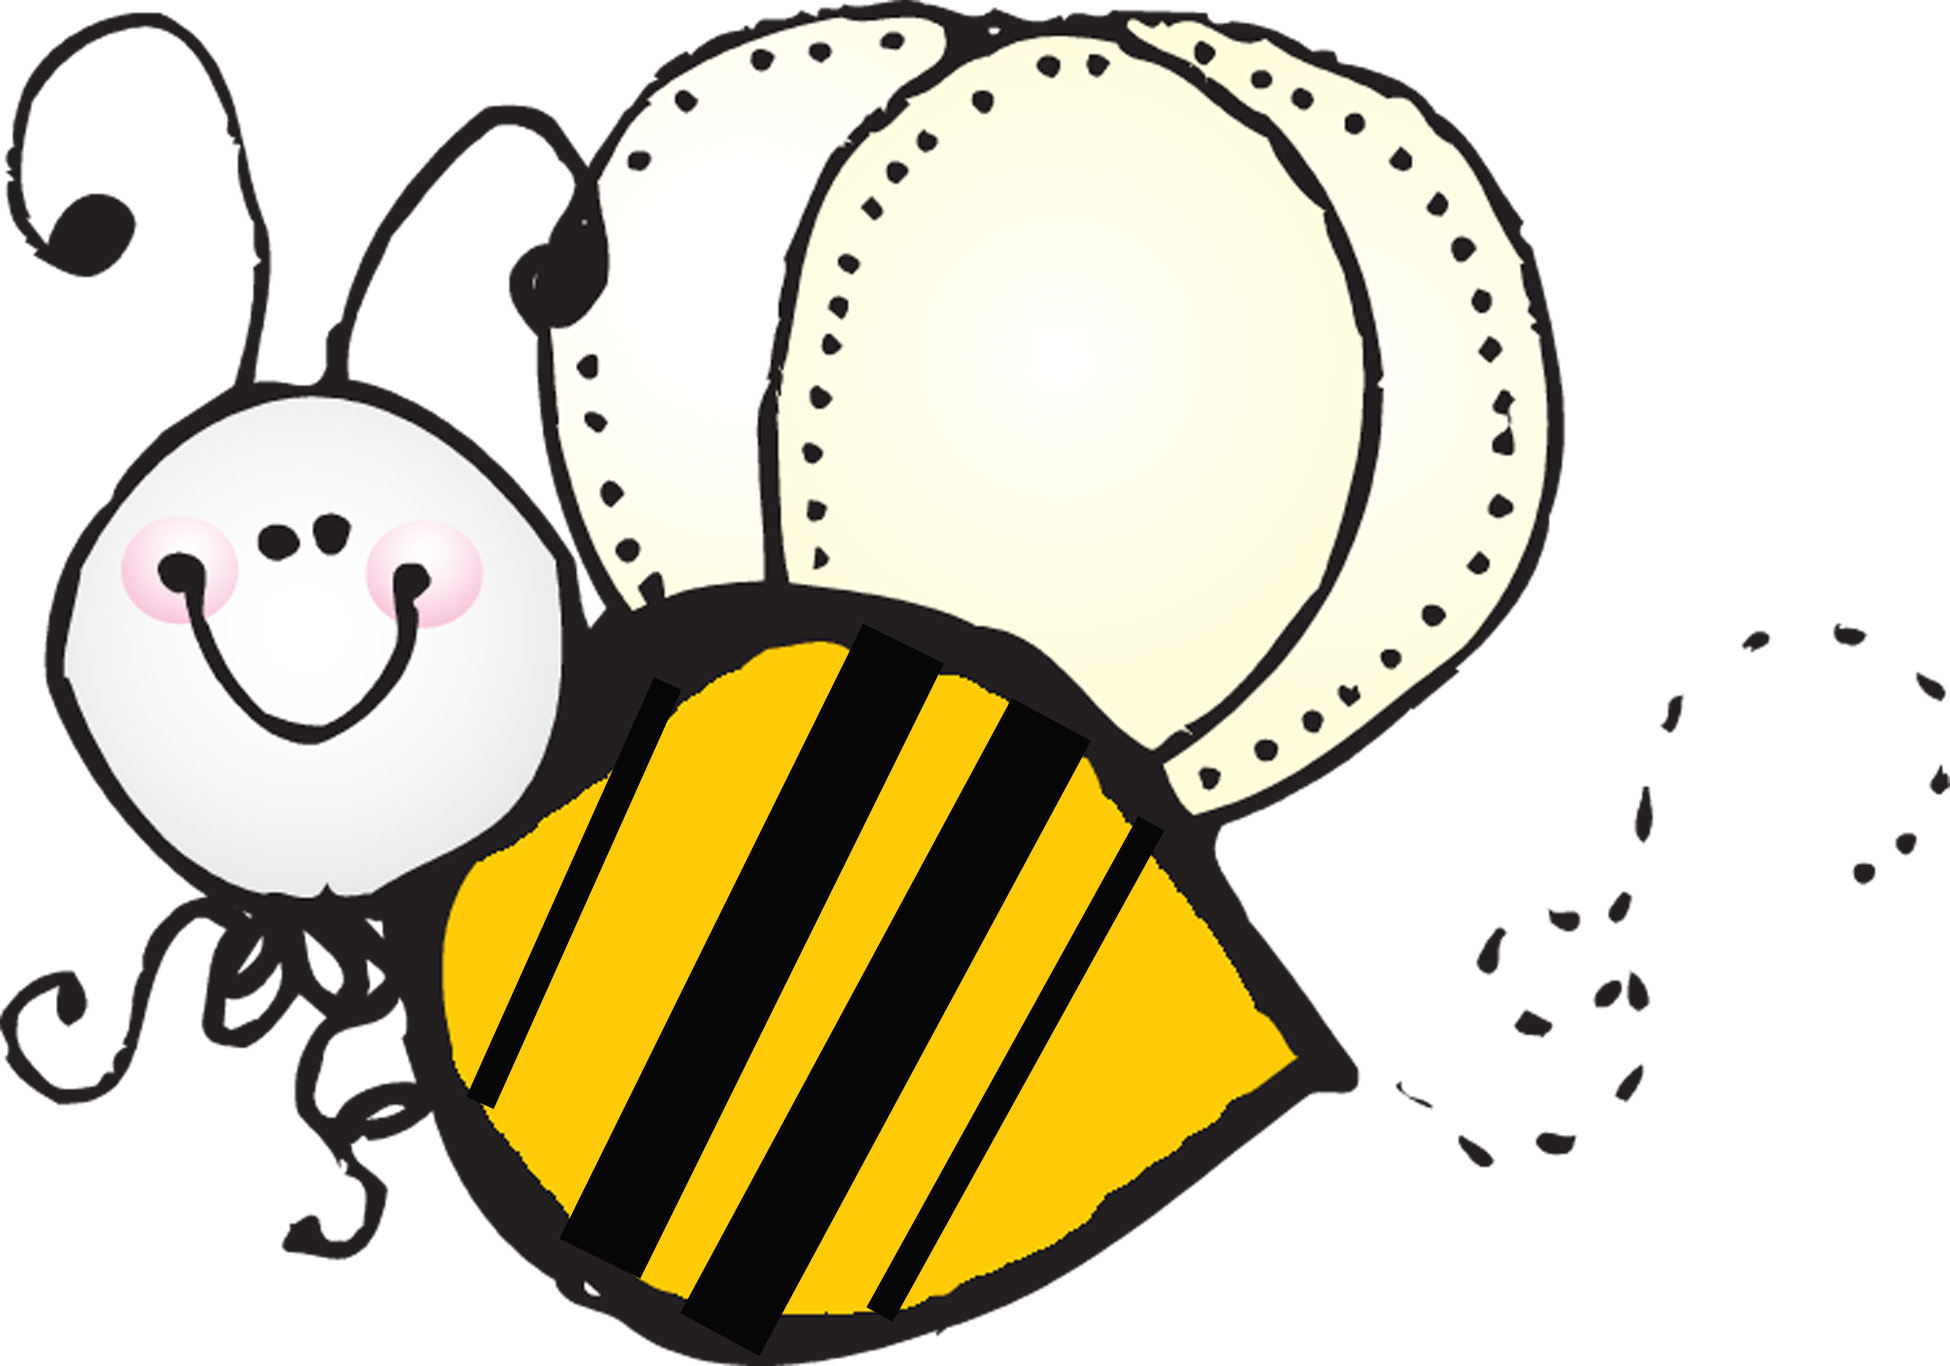 Spell Bee Wallpapers - Clipart library. ladybug | Oopsey Daisy